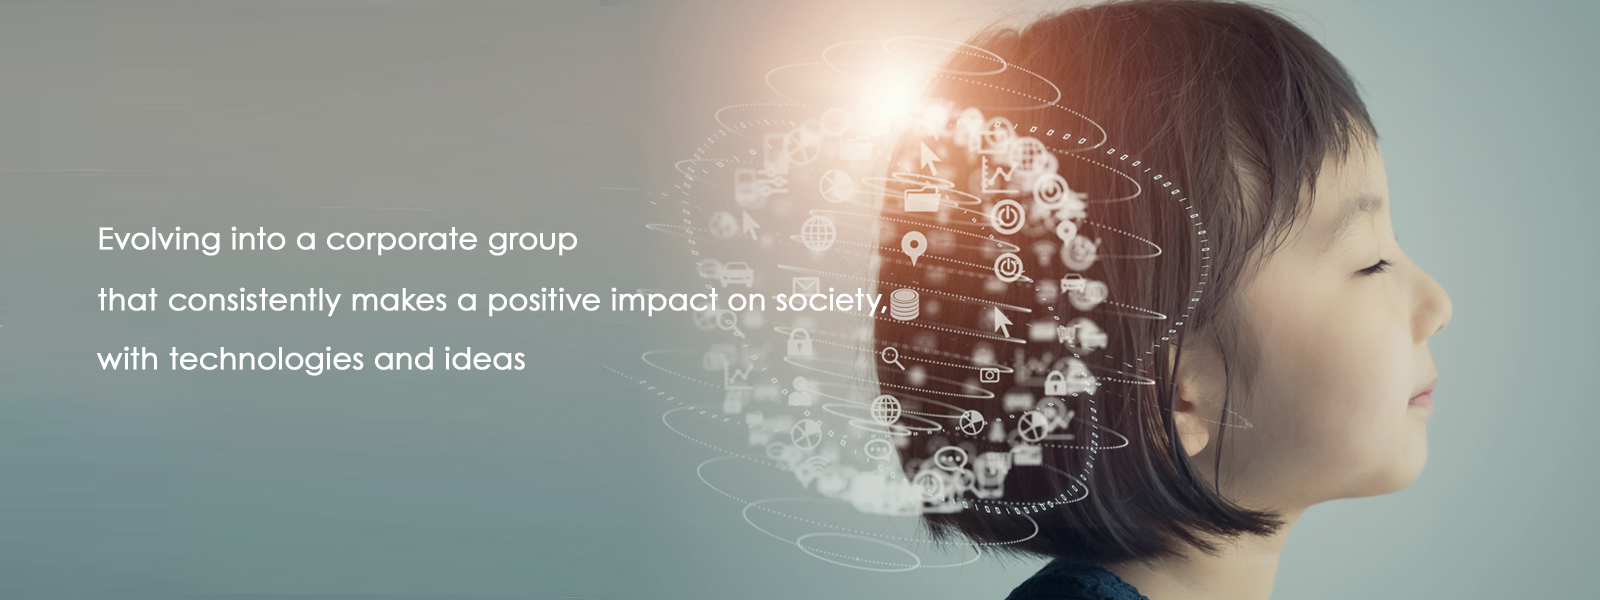 Evolving into a corporate group that consistently makes a positive impact on society, with technologies and ideas.